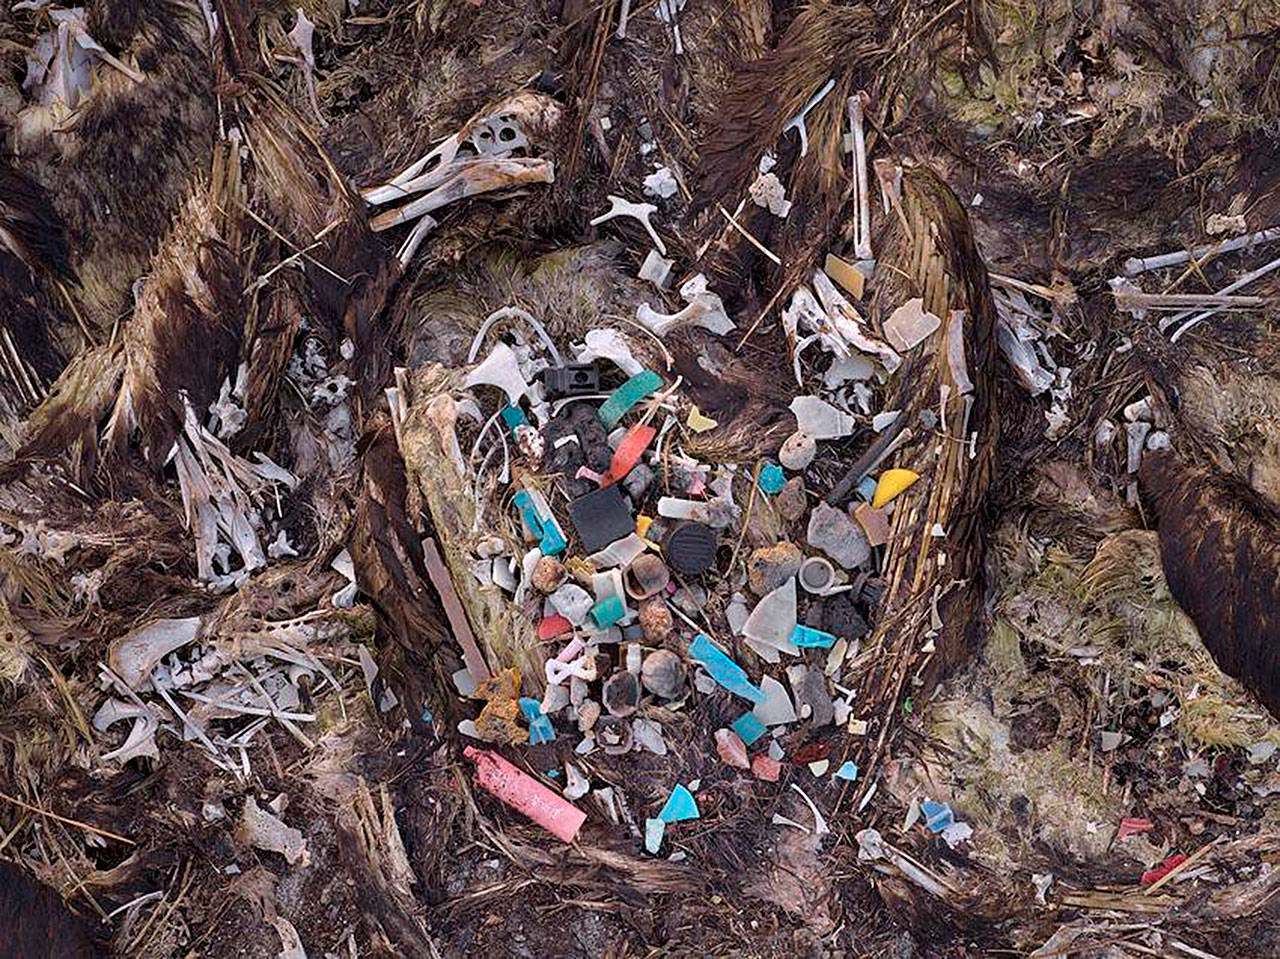 On his first trip to the remote island, the only albatross Chris Jordan saw were thousands of dead birds strewn over the beach in various stages of decomposition. “For me, kneeling over their carcasses is like looking into a macabre mirror,” he says. “These birds reflect back an appallingly emblematic result of the collective trance of our consumerism and runaway industrial growth.” (Photo provided by Chris Jordan)